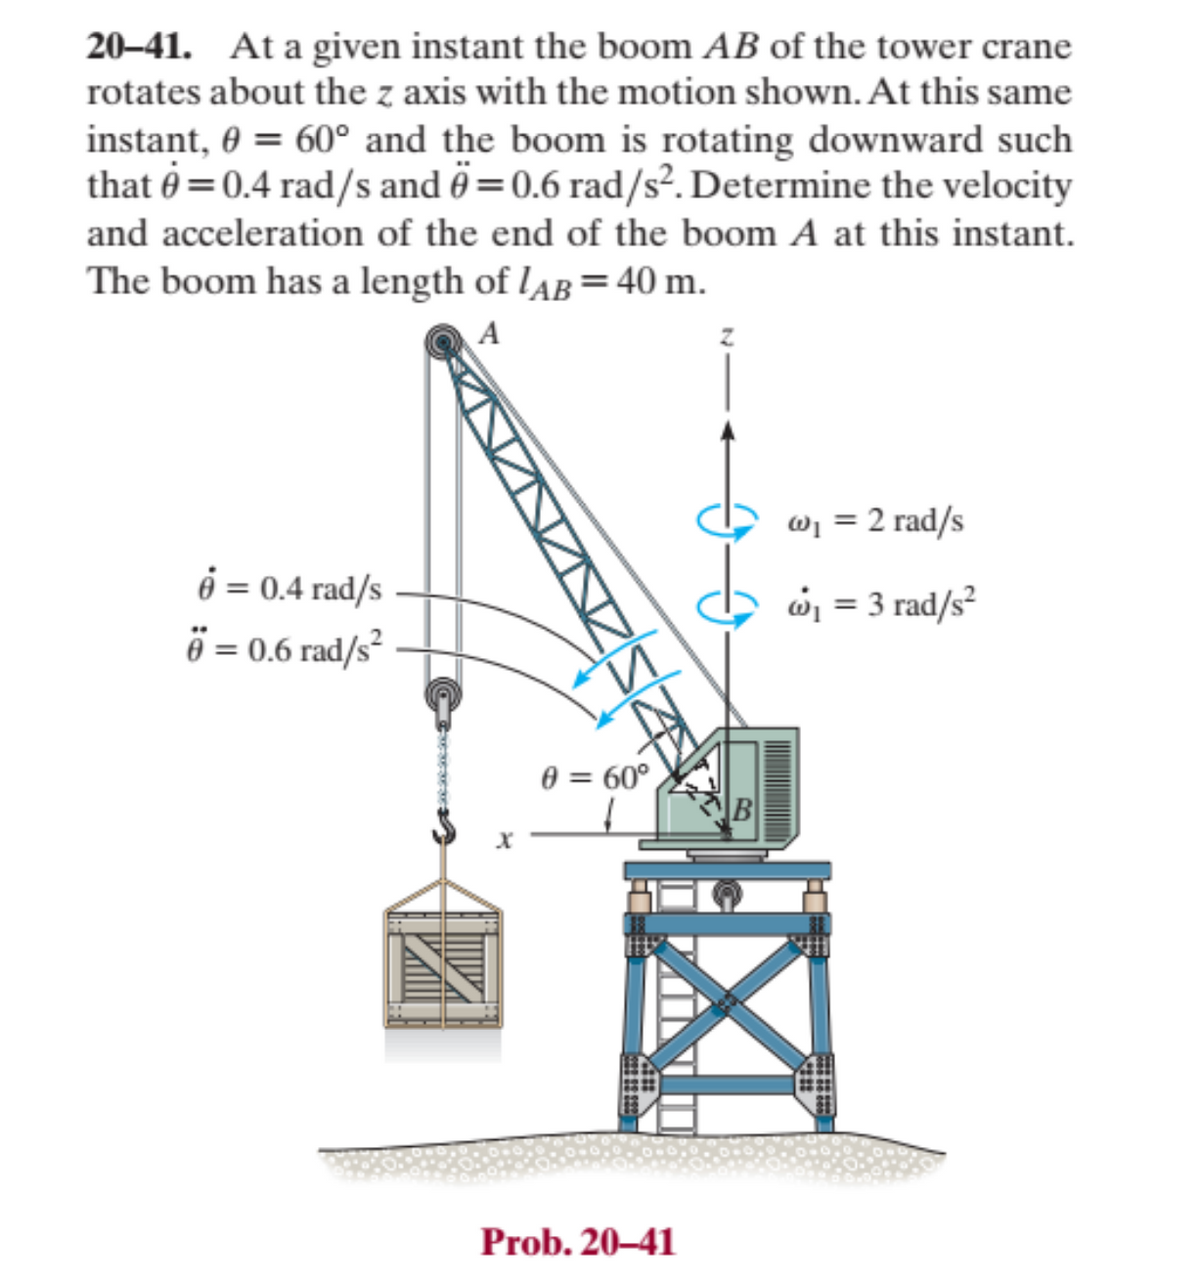 20-41. At a given instant the boom AB of the tower crane
rotates about the z axis with the motion shown. At this same
instant, 0 = 60° and the boom is rotating downward such
that = 0.4 rad/s and = 0.6 rad/s². Determine the velocity
and acceleration of the end of the boom A at this instant.
The boom has a length of LAB = 40 m.
A
é = 0.4 rad/s
6 € = 0.6 rad/s²
0 = 60°
B
Prob. 20-41
w₁ = 2 rad/s
@₁ = 3 rad/s²
X